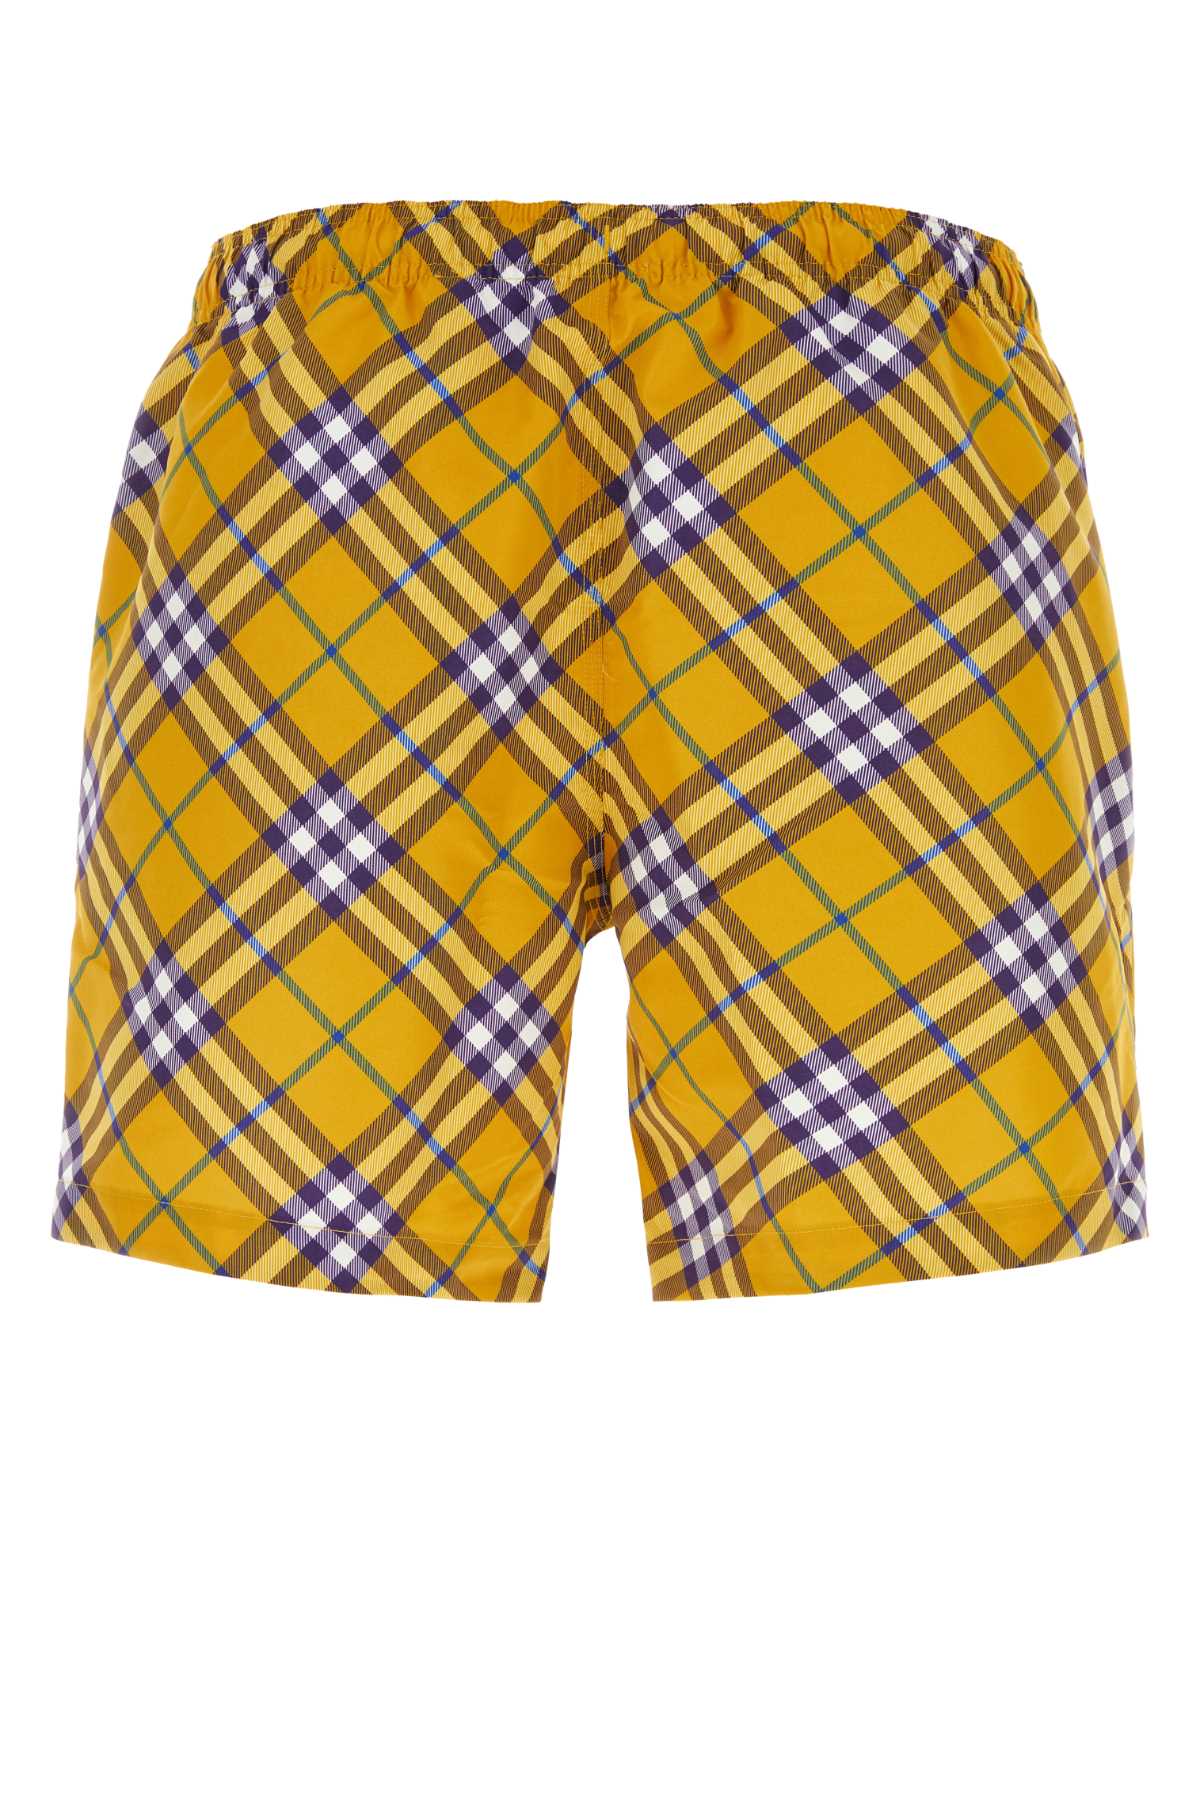 BURBERRY PRINTED POLYESTER SWIMMING SHORTS